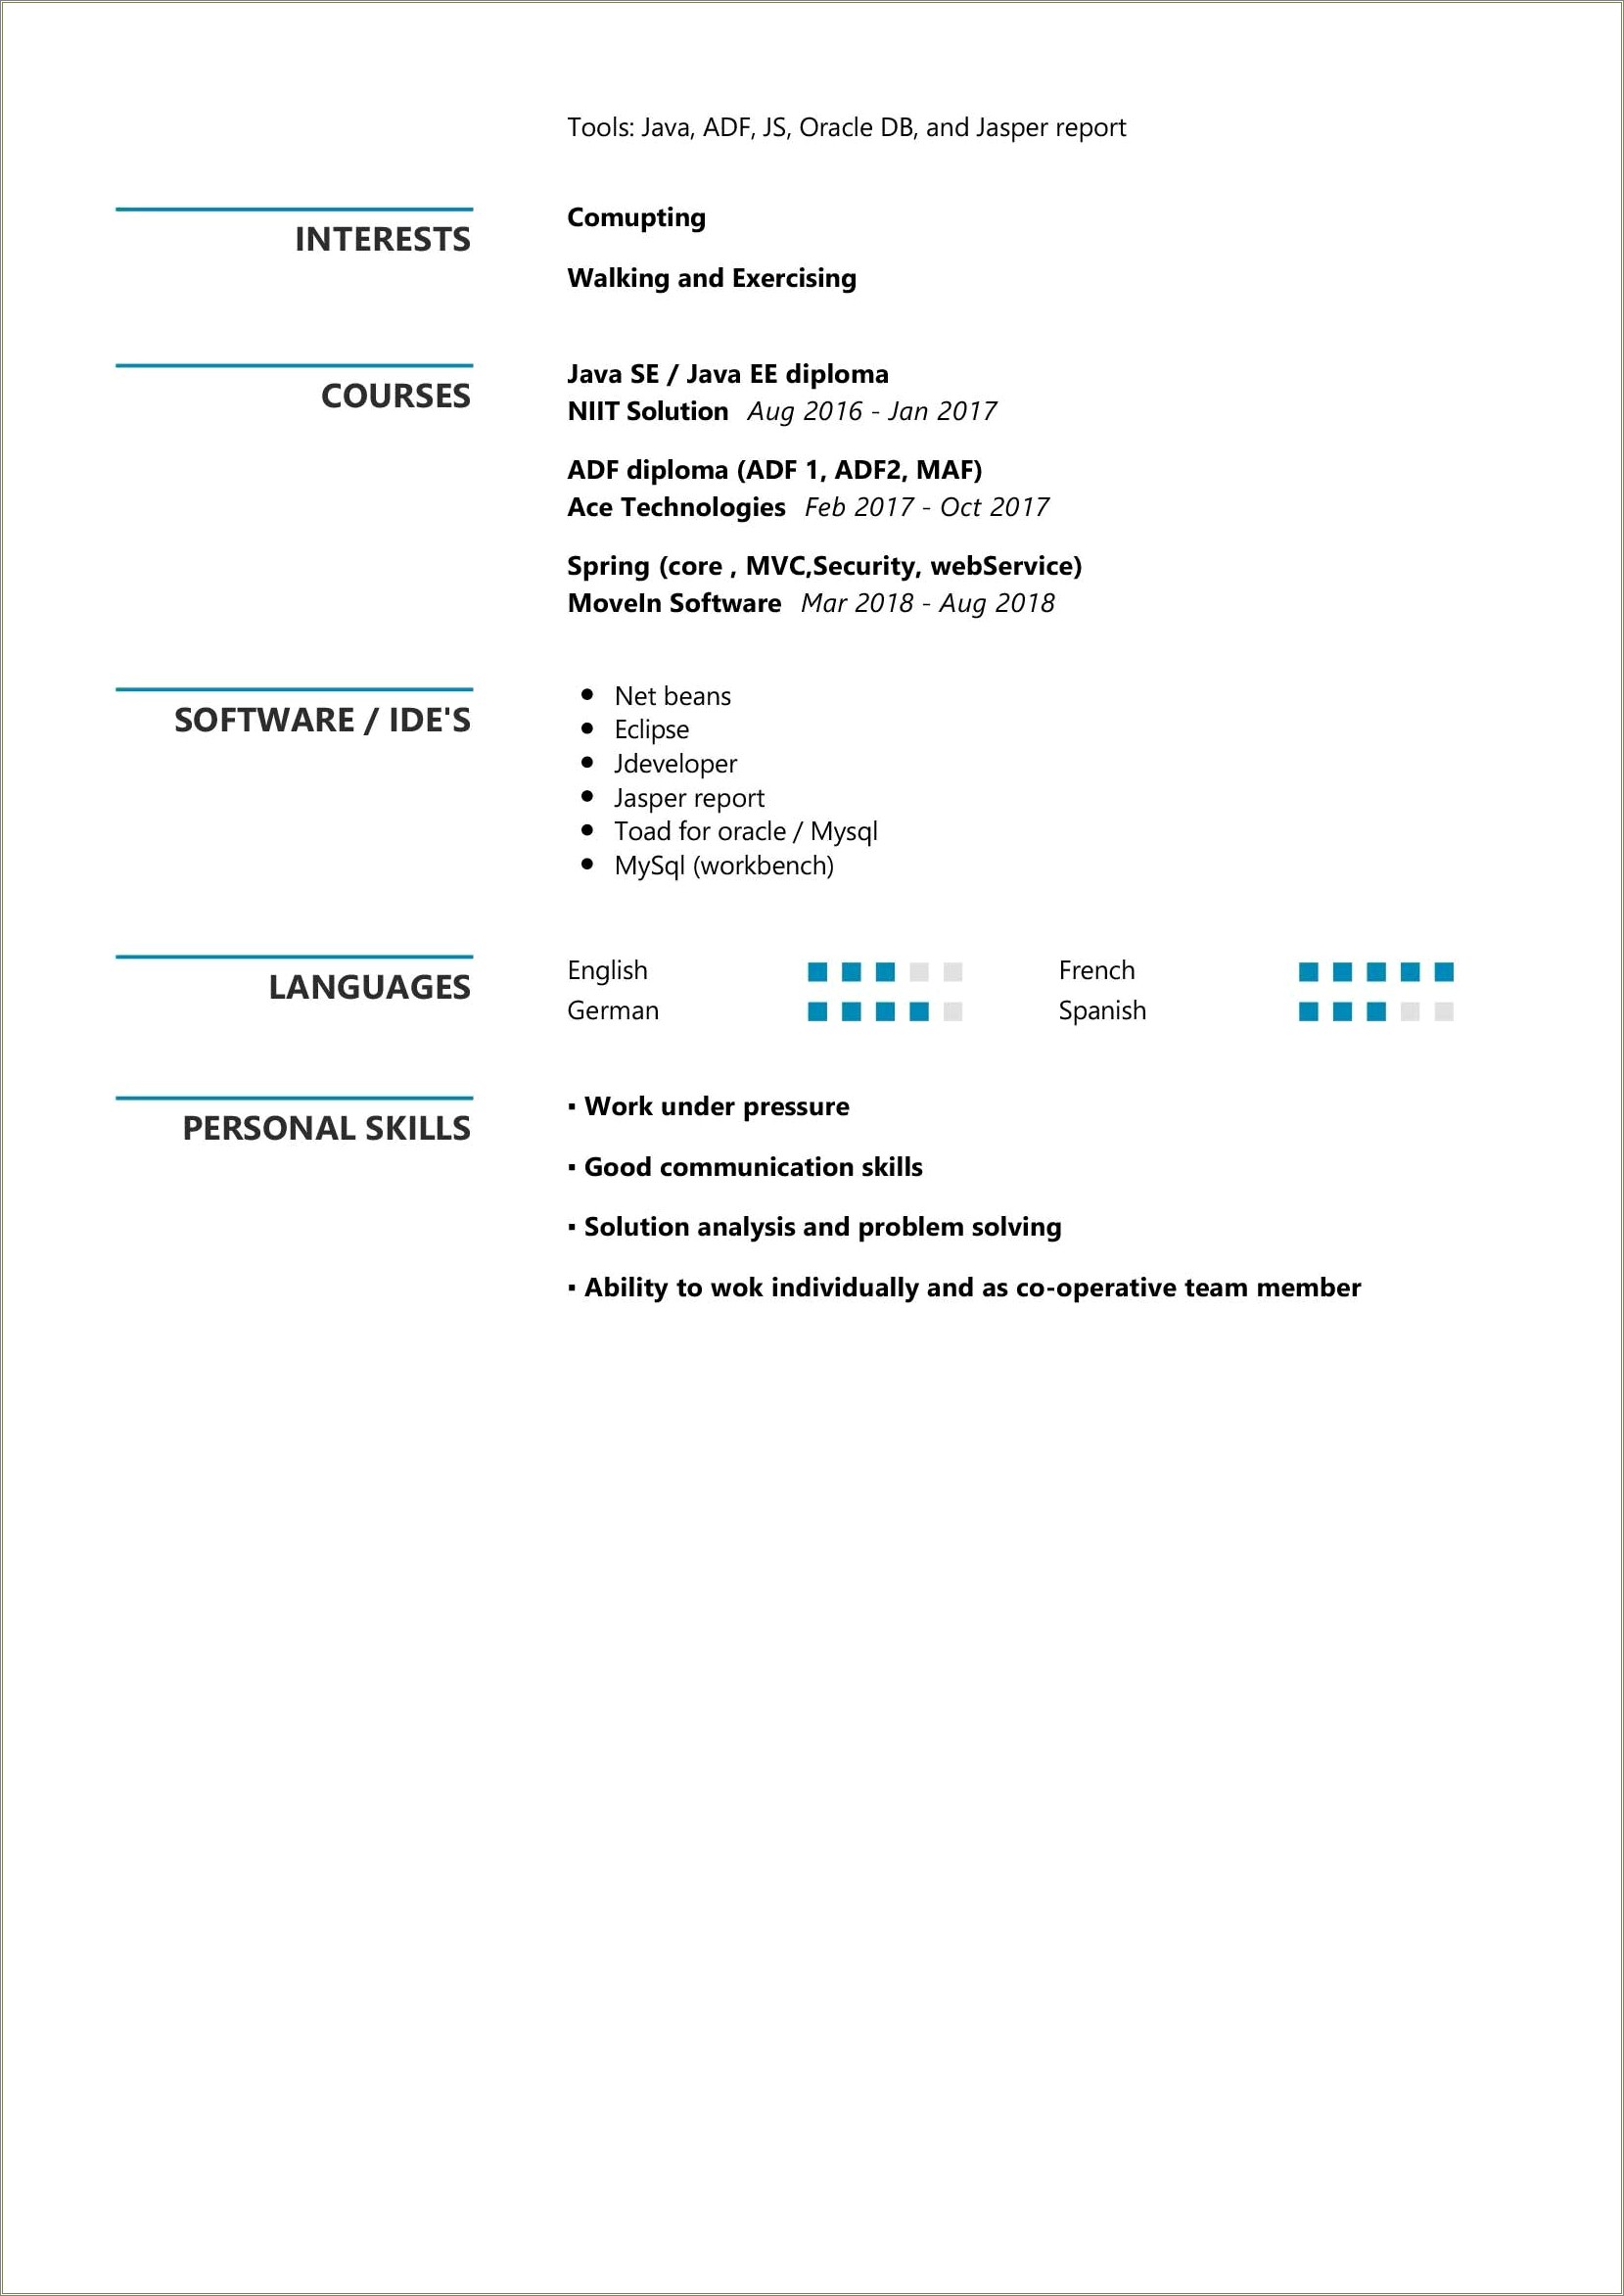 Sample Resume For 3 Years Experience In Java